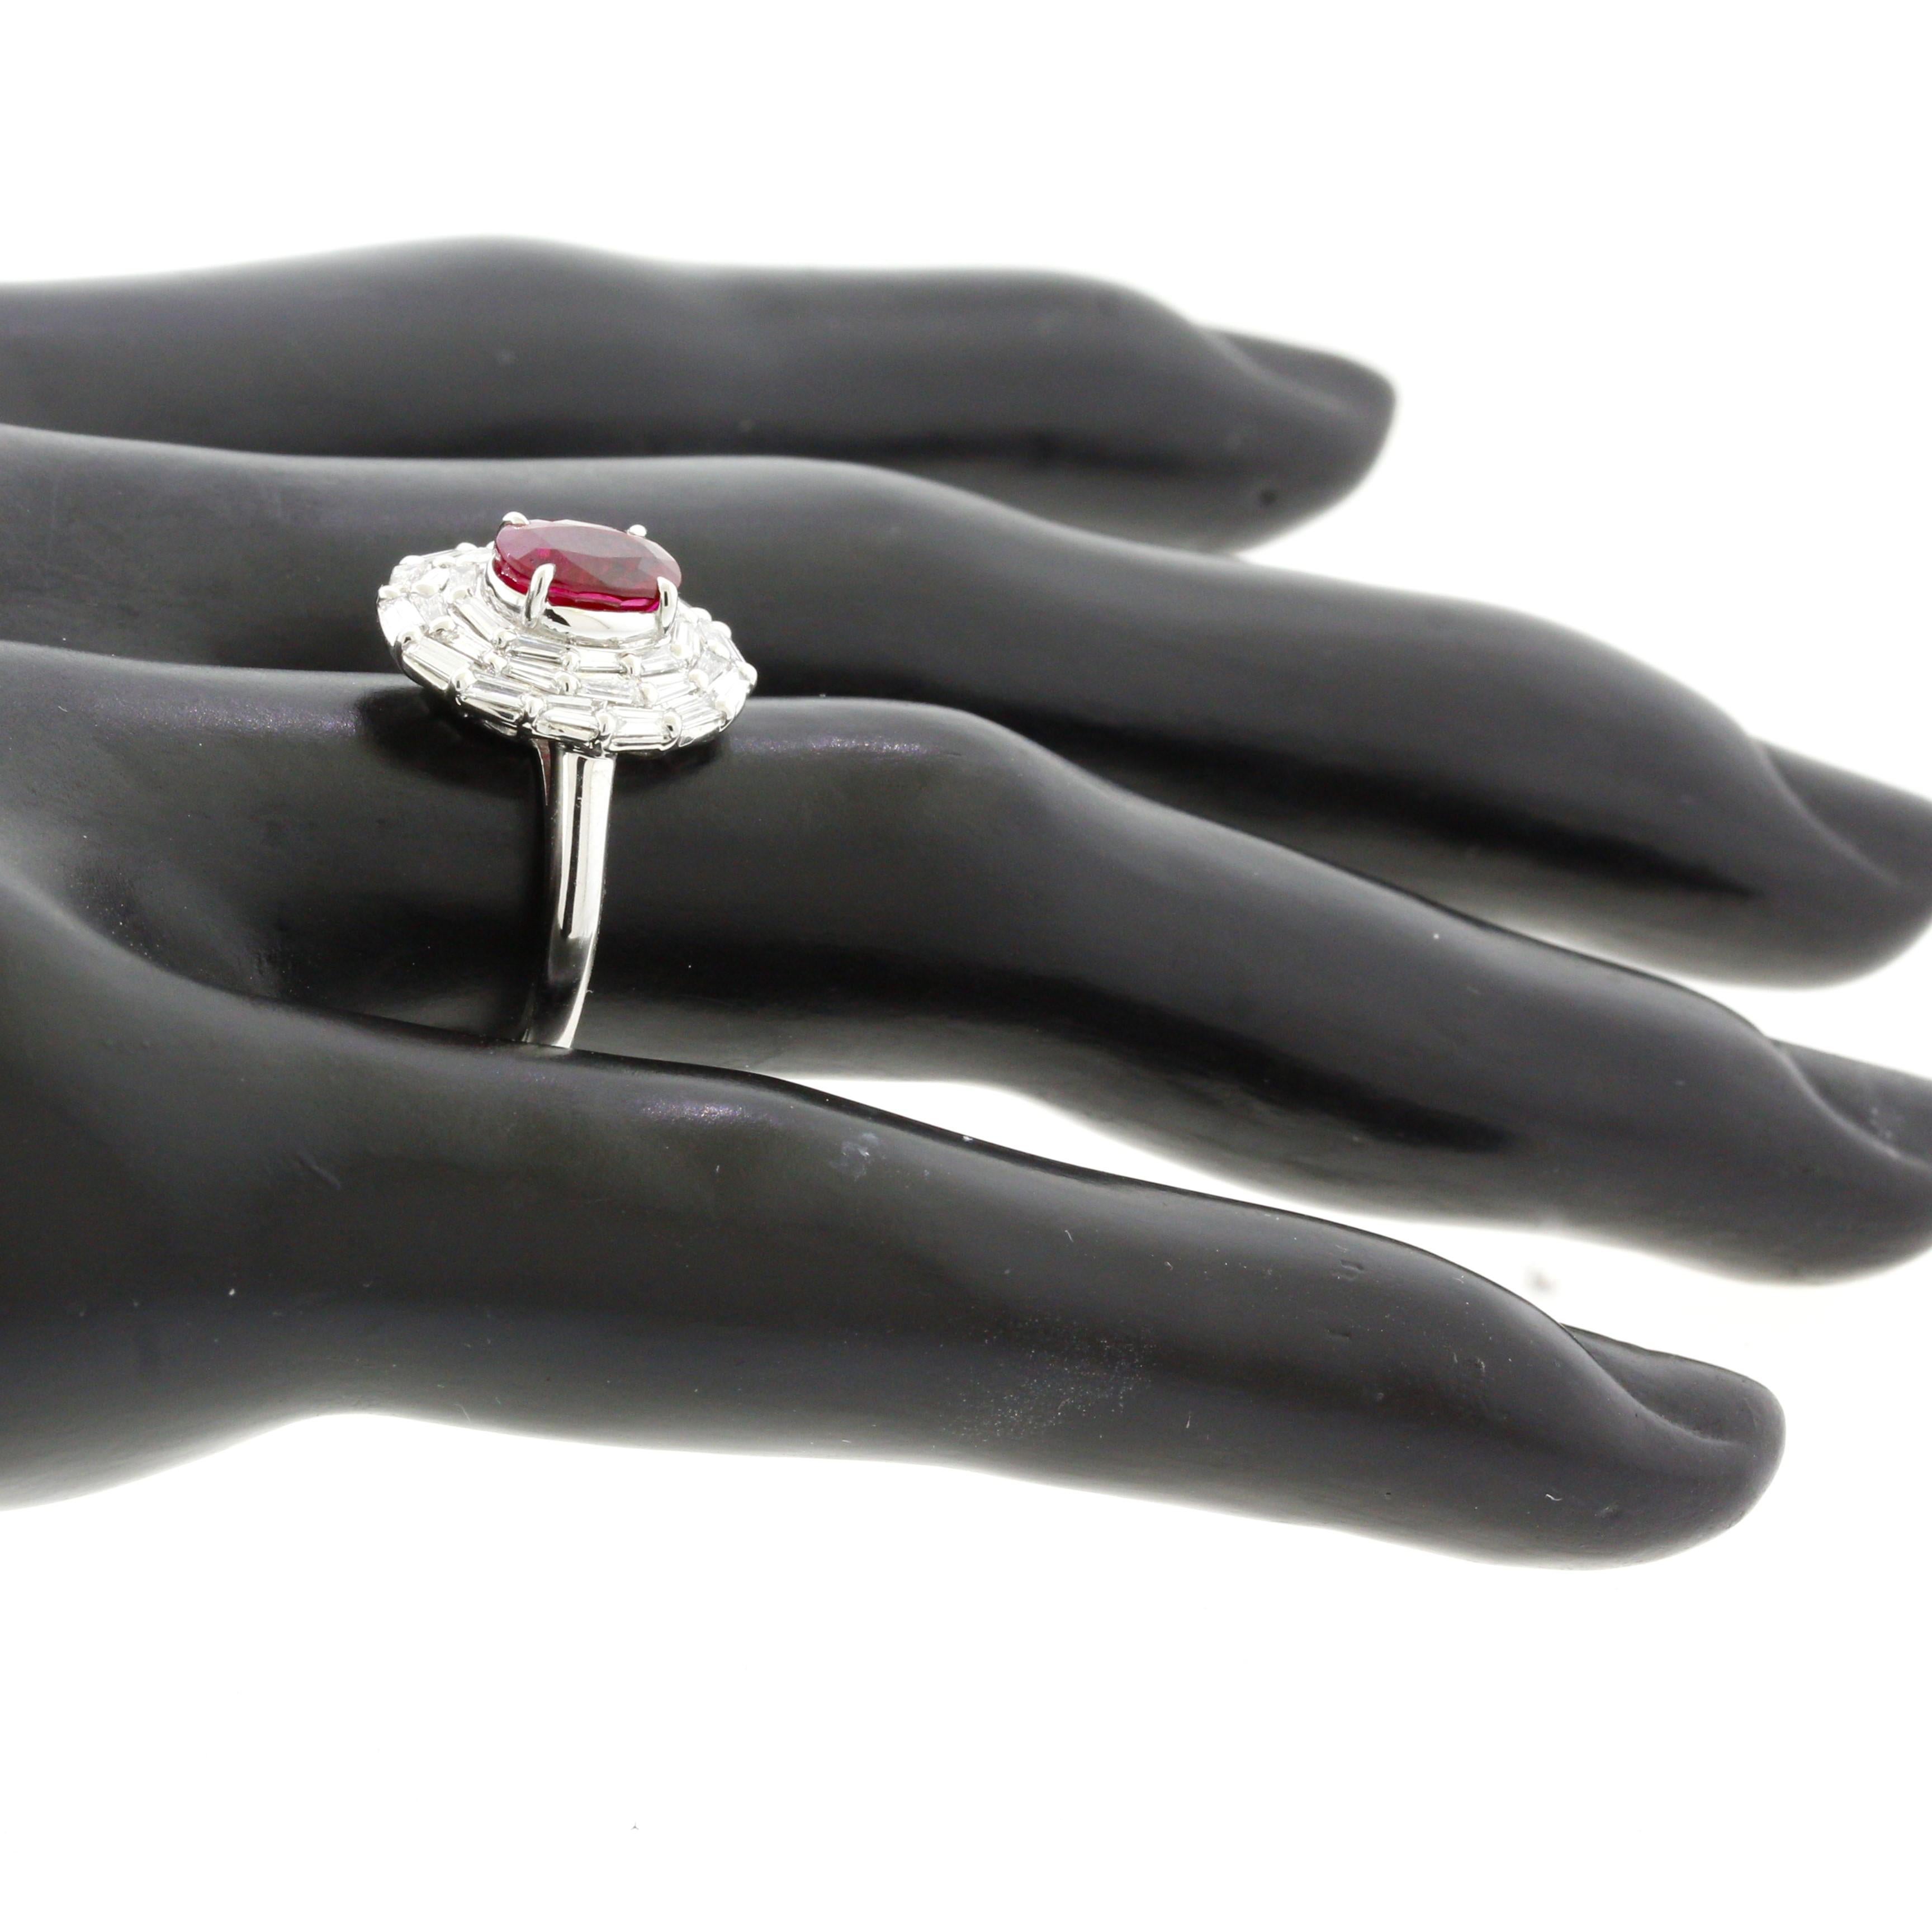 Oval Cut 1.47 Carat Burmese “Pigeon Blood” Ruby Diamond Platinum Ring, GIA Certified For Sale